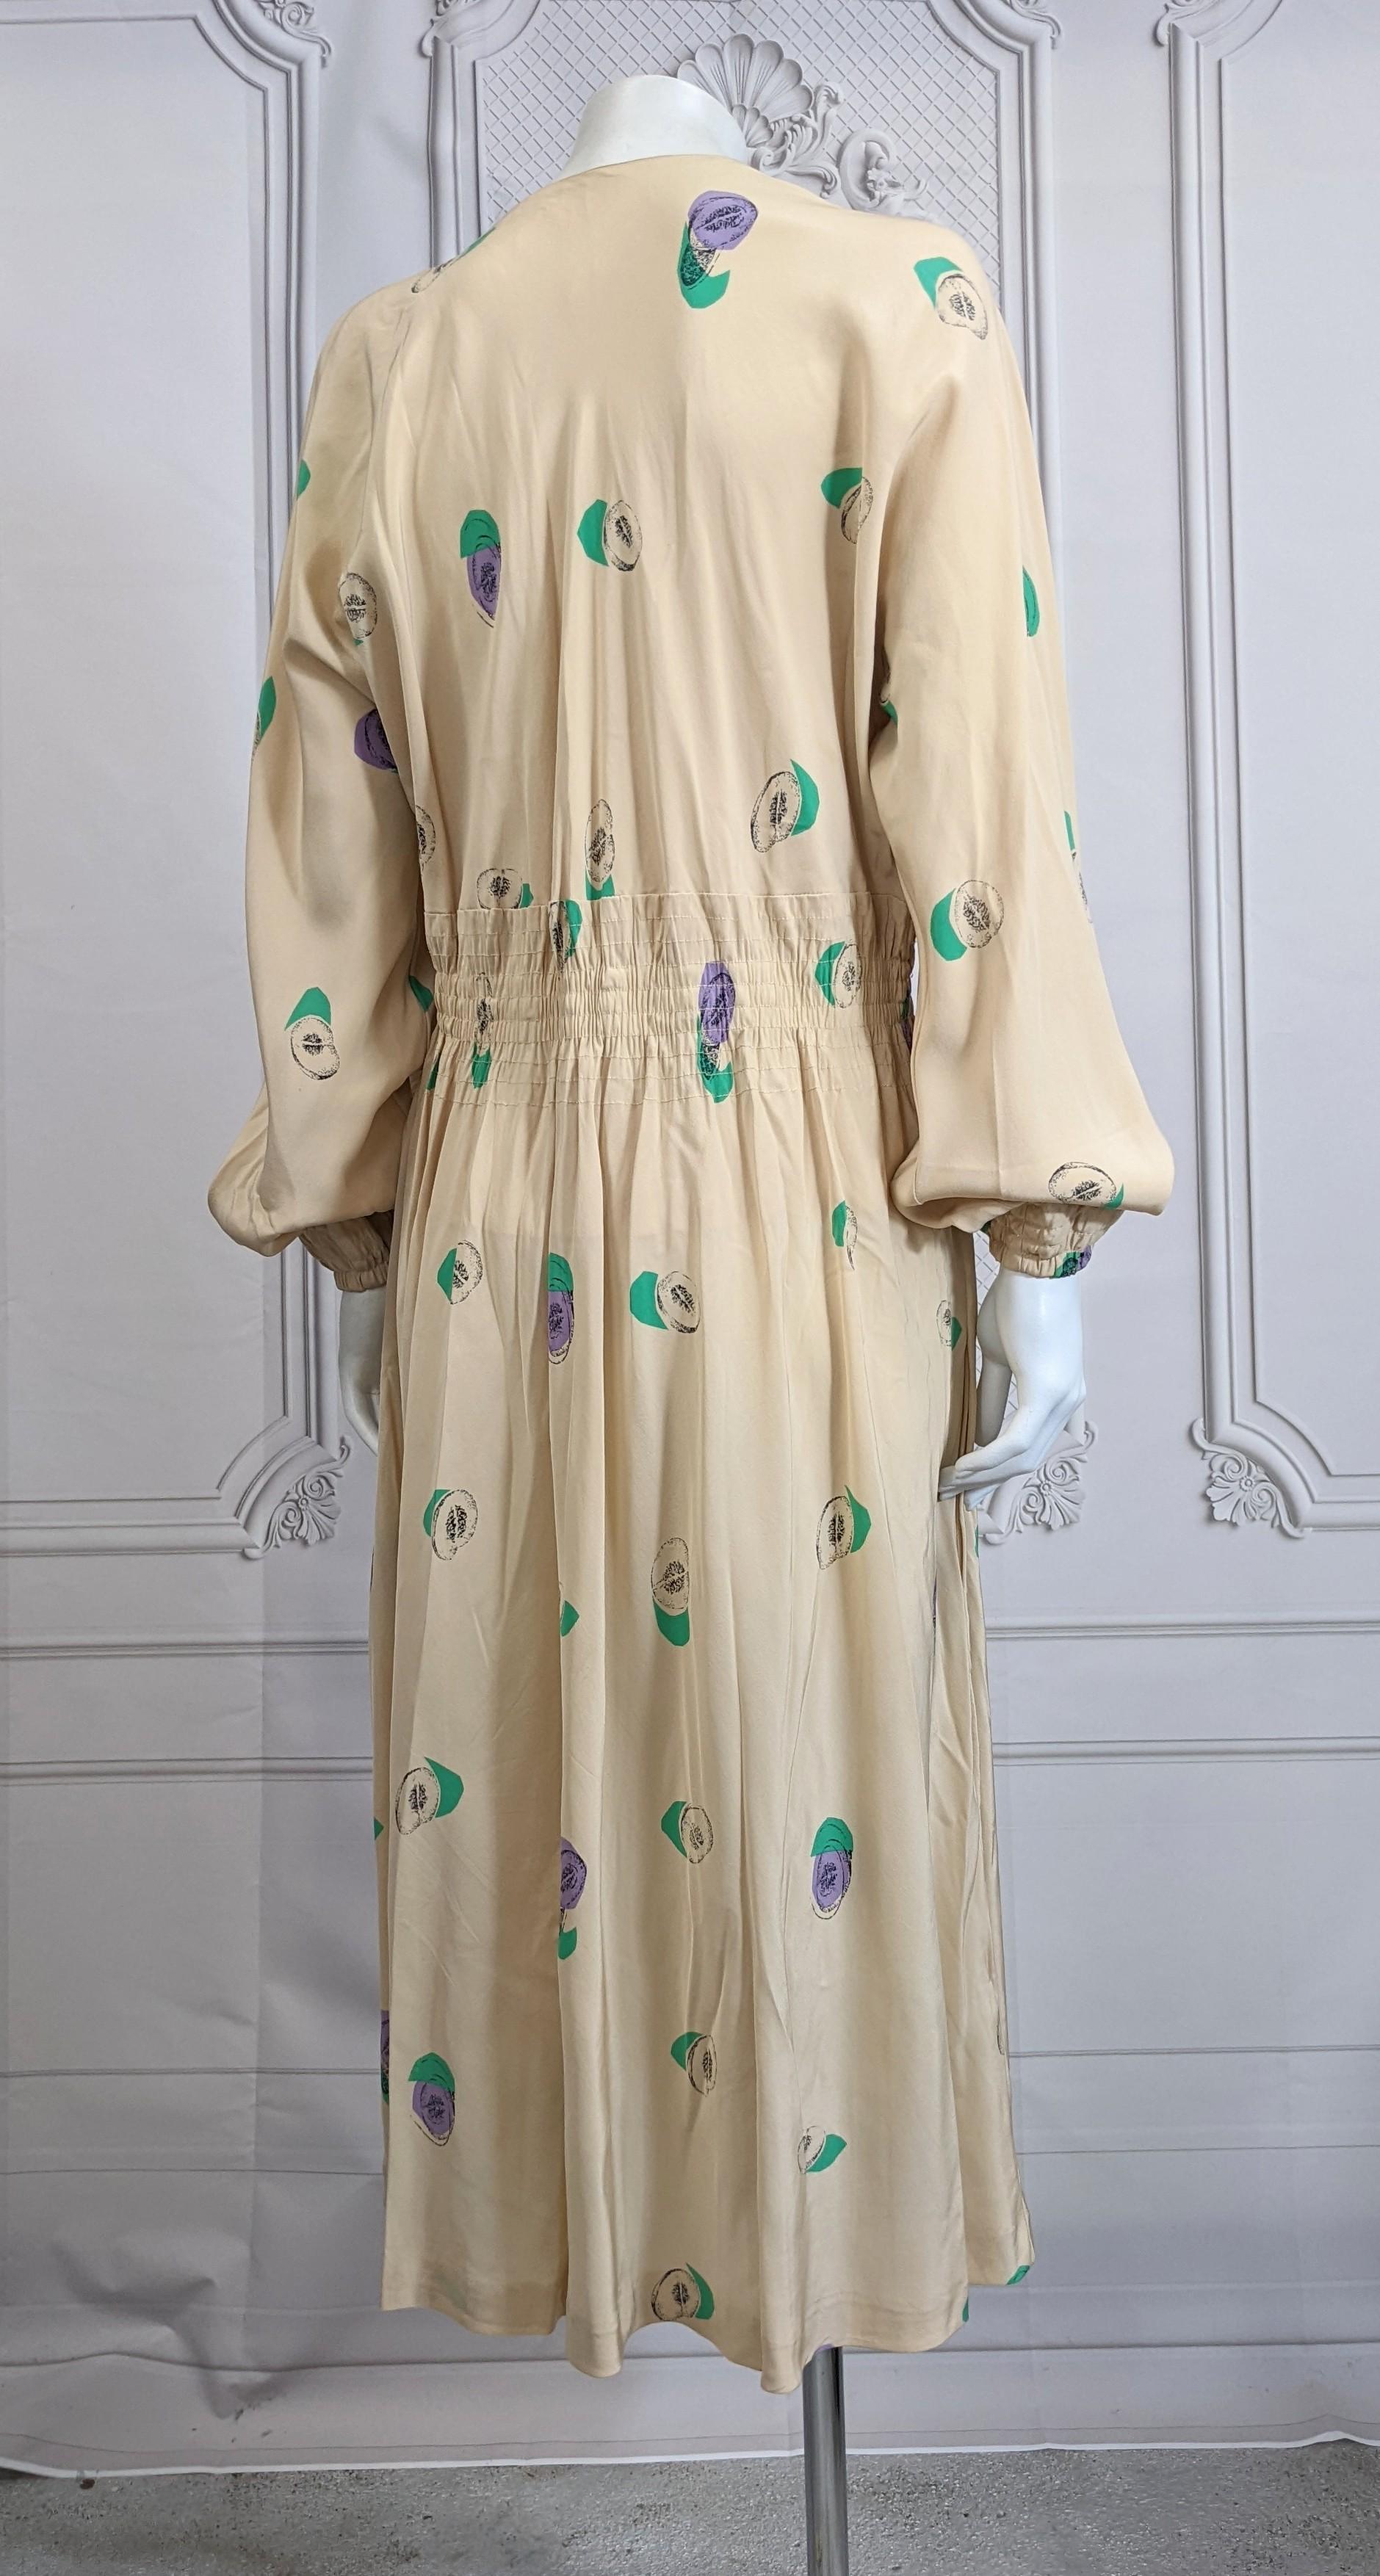 Halston Silk Crepe Faux Wrap Dress In Good Condition For Sale In New York, NY